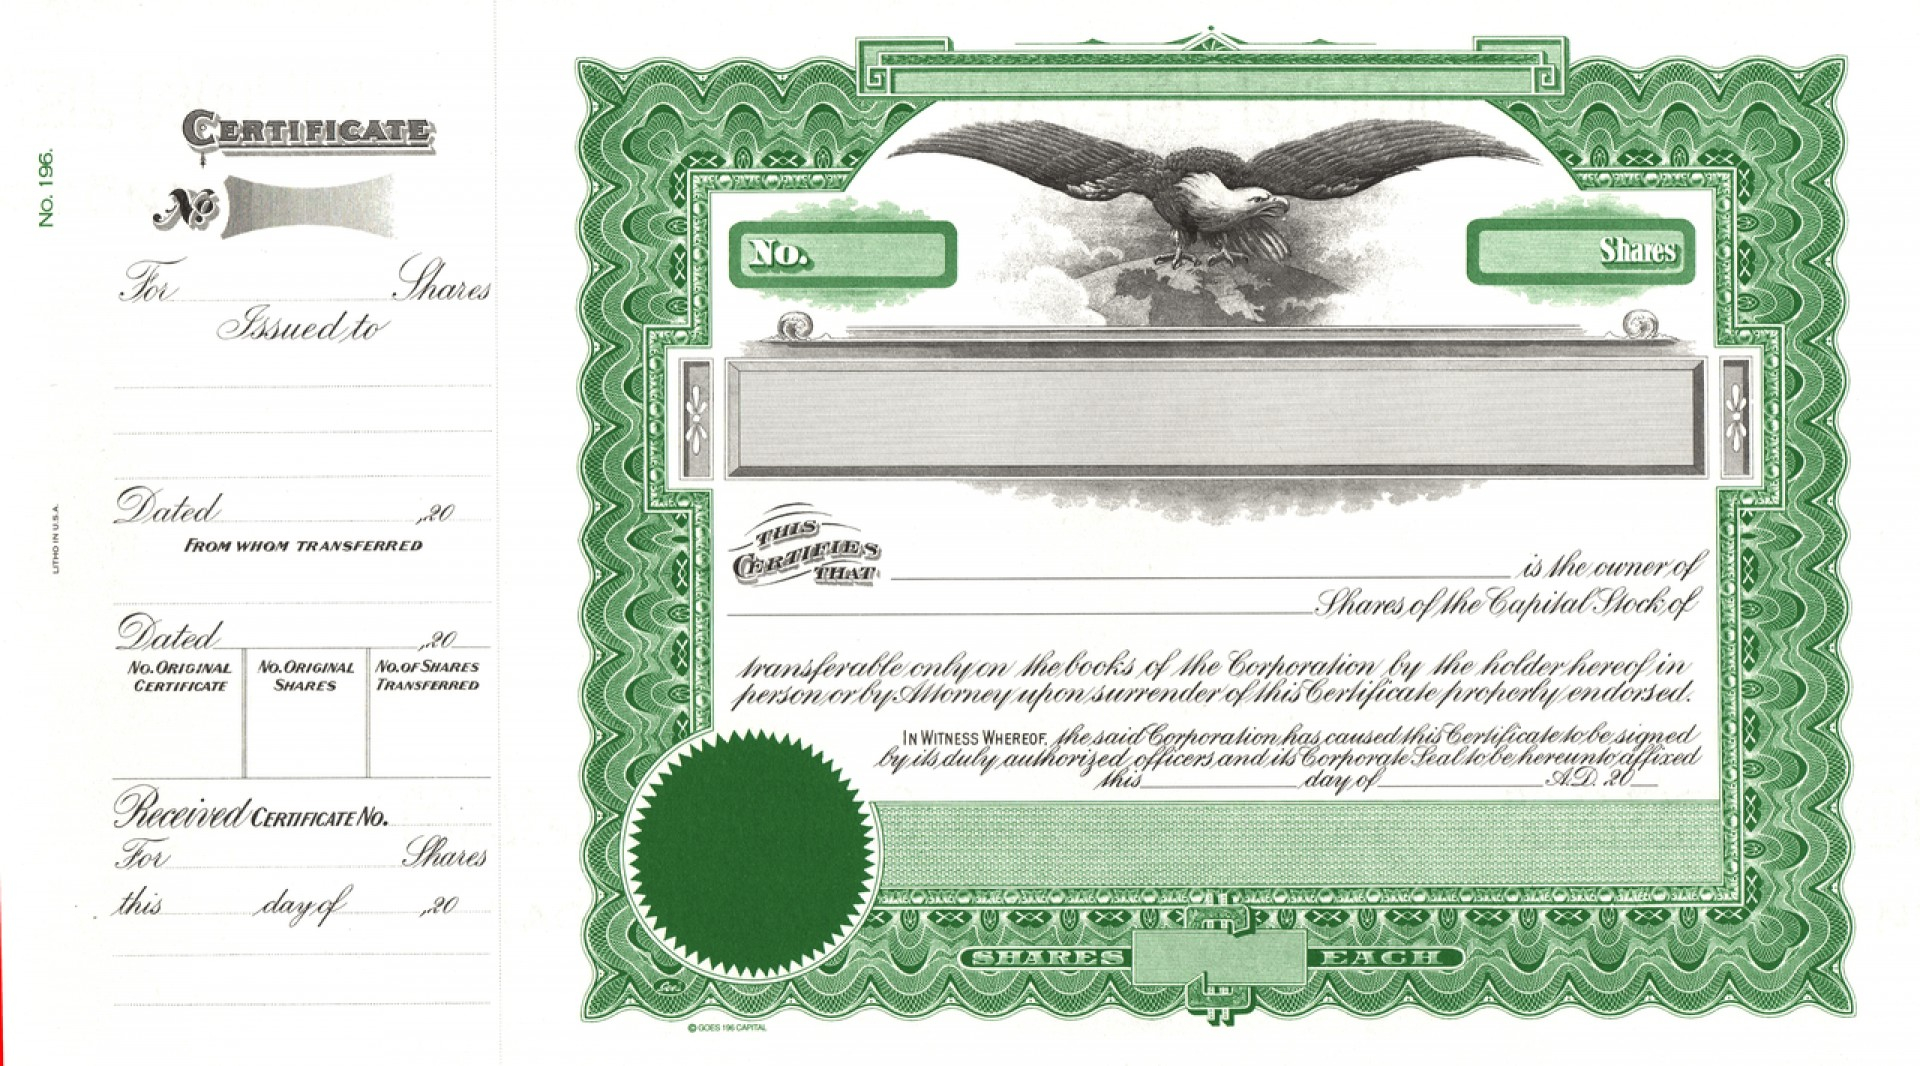 014-free-stock-certificate-template-ideas-microsoft-word-with-regard-to